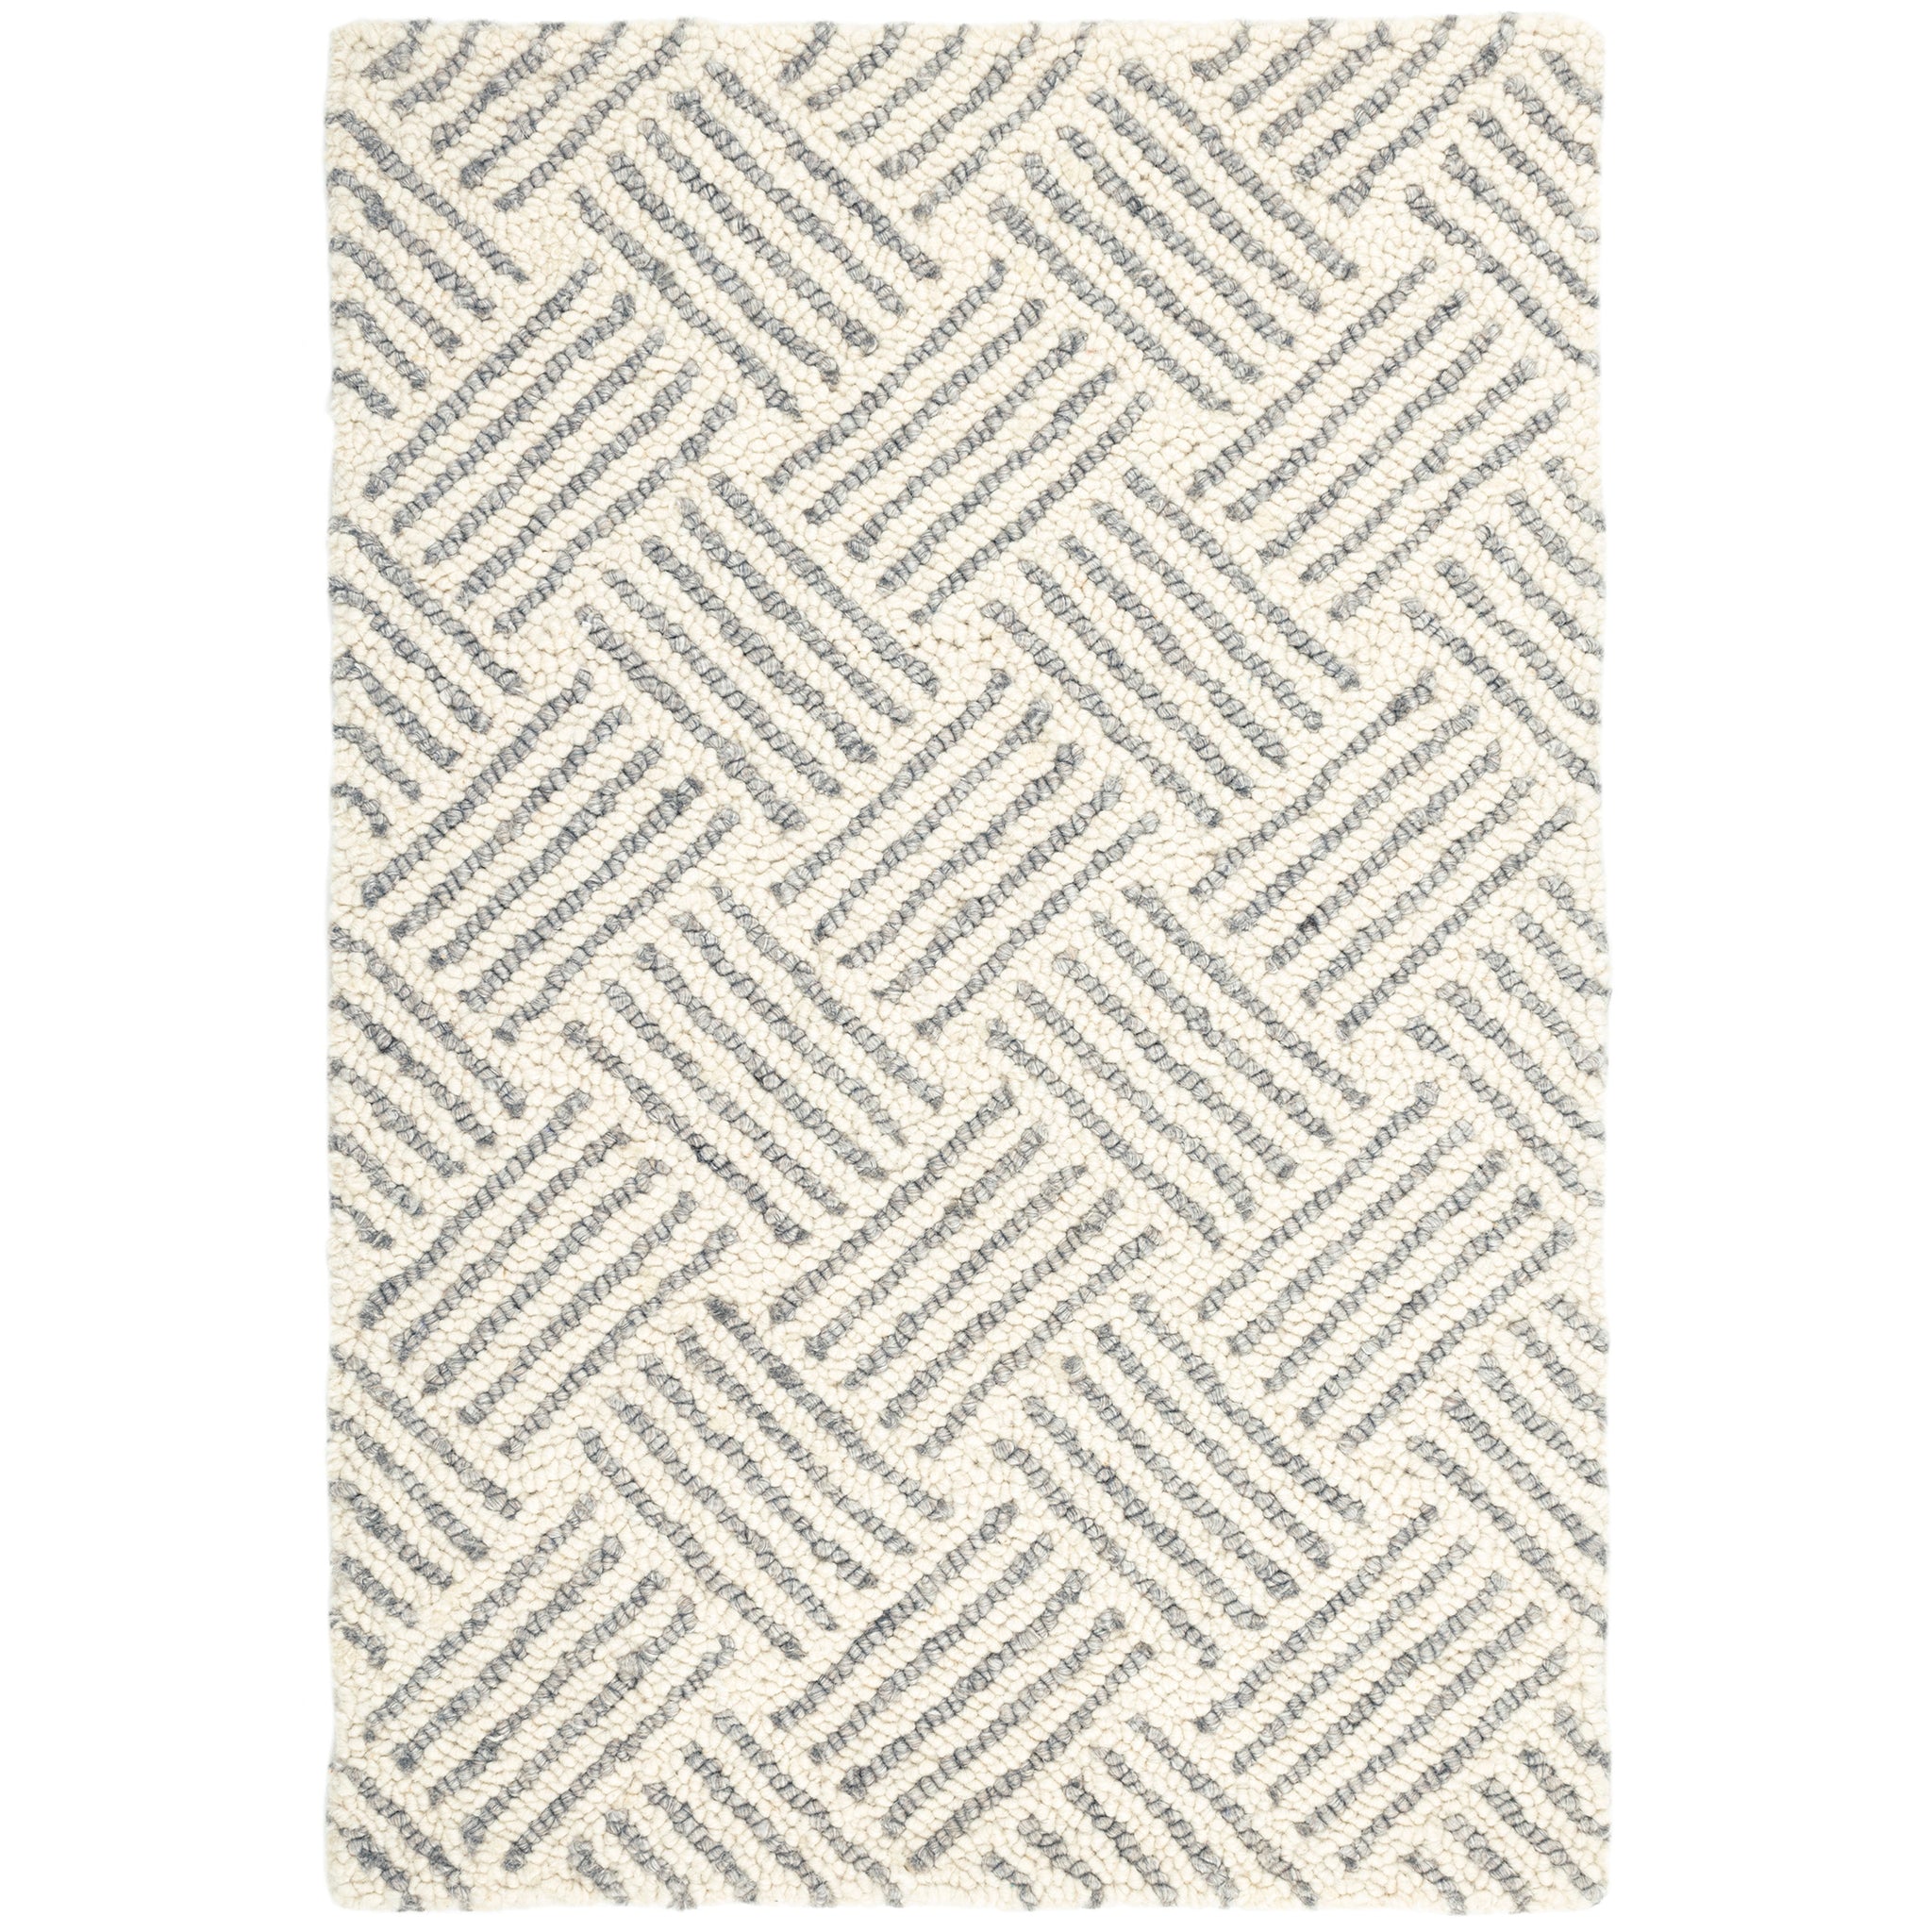 Maine Cottage Layers Hooked Wool Rug | Maine Cottage¨ 